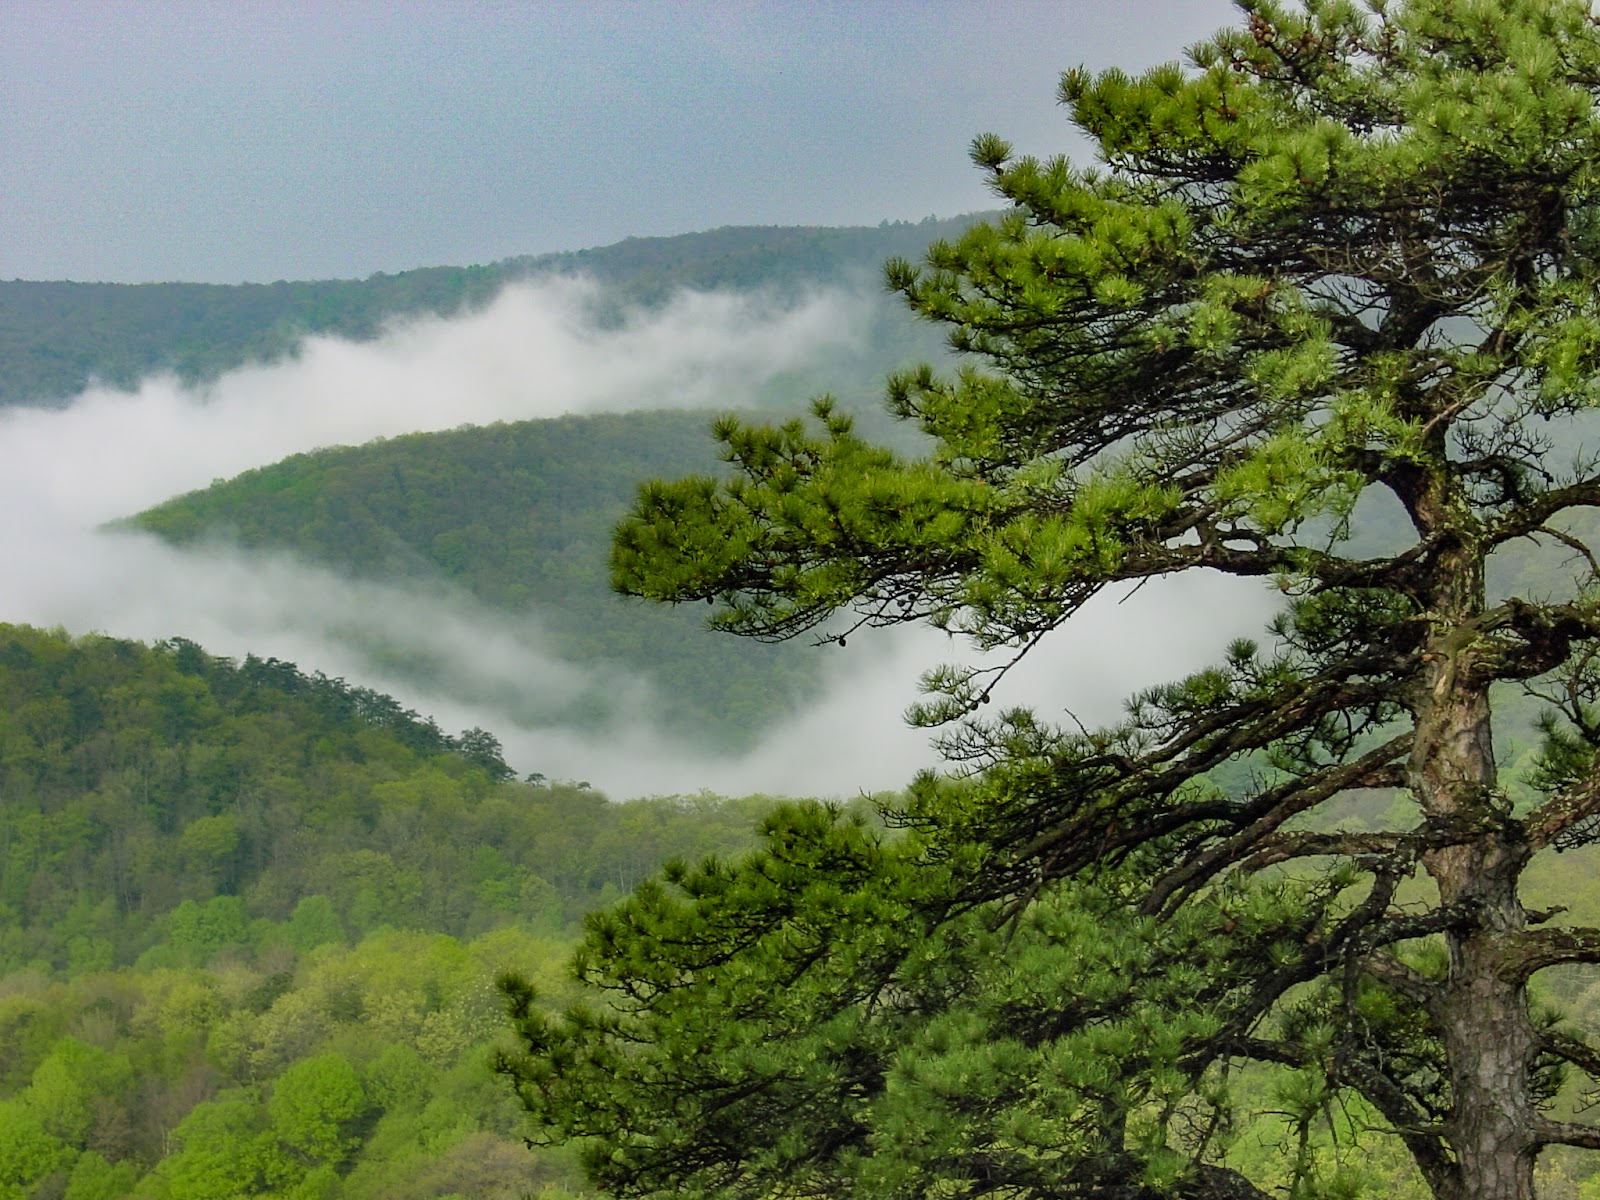 A spruce tree has hill tops in the background surrounded by flowing clouds